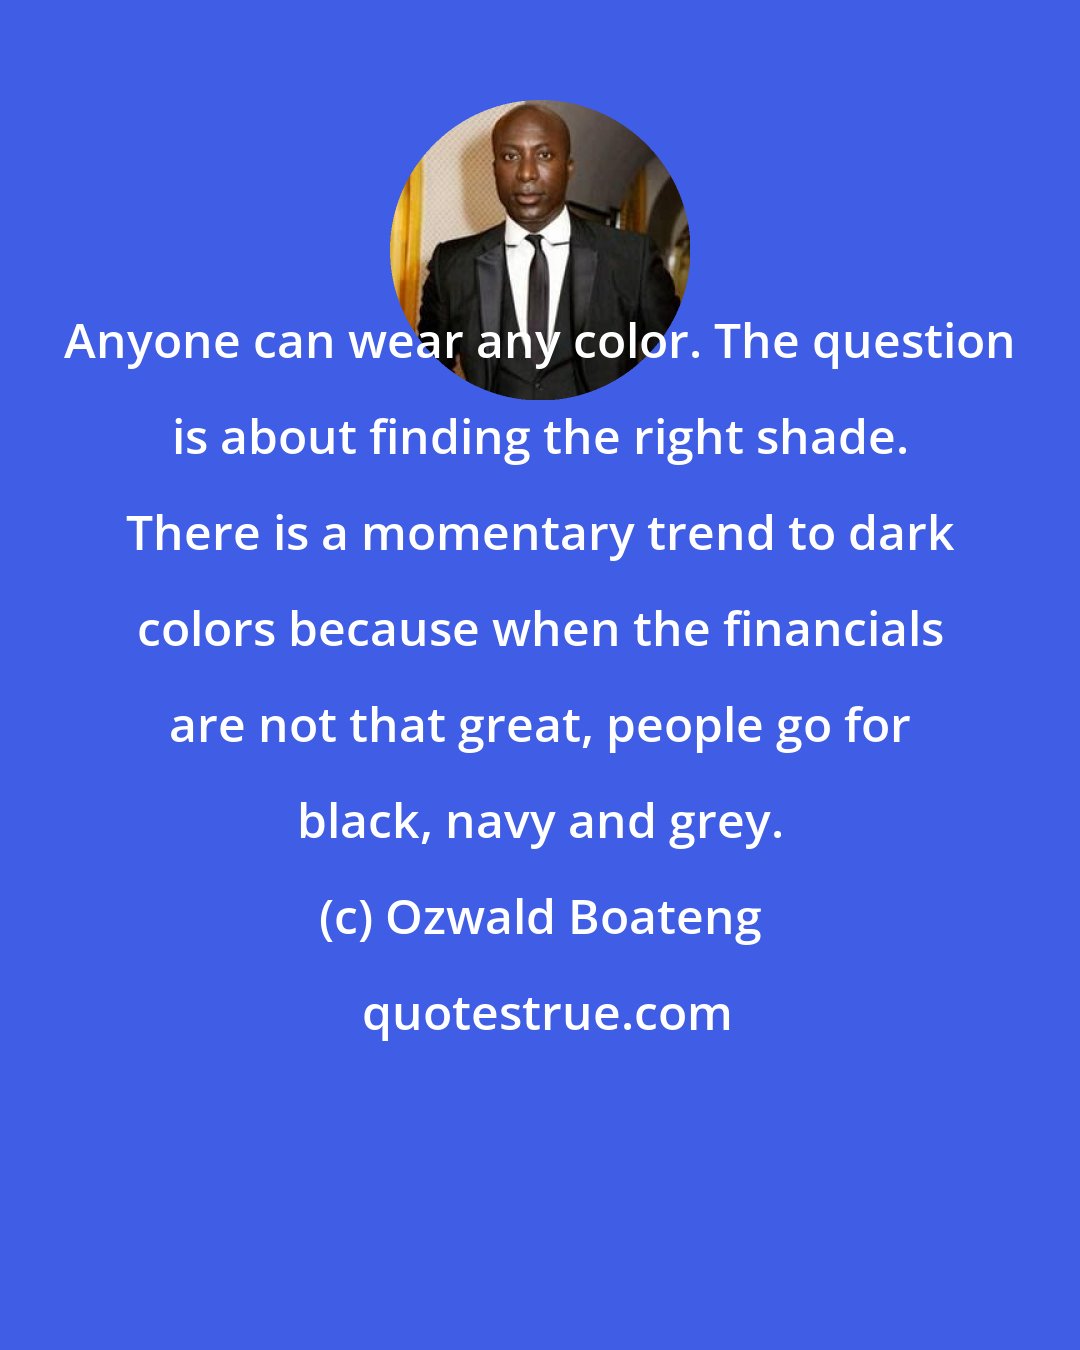 Ozwald Boateng: Anyone can wear any color. The question is about finding the right shade. There is a momentary trend to dark colors because when the financials are not that great, people go for black, navy and grey.